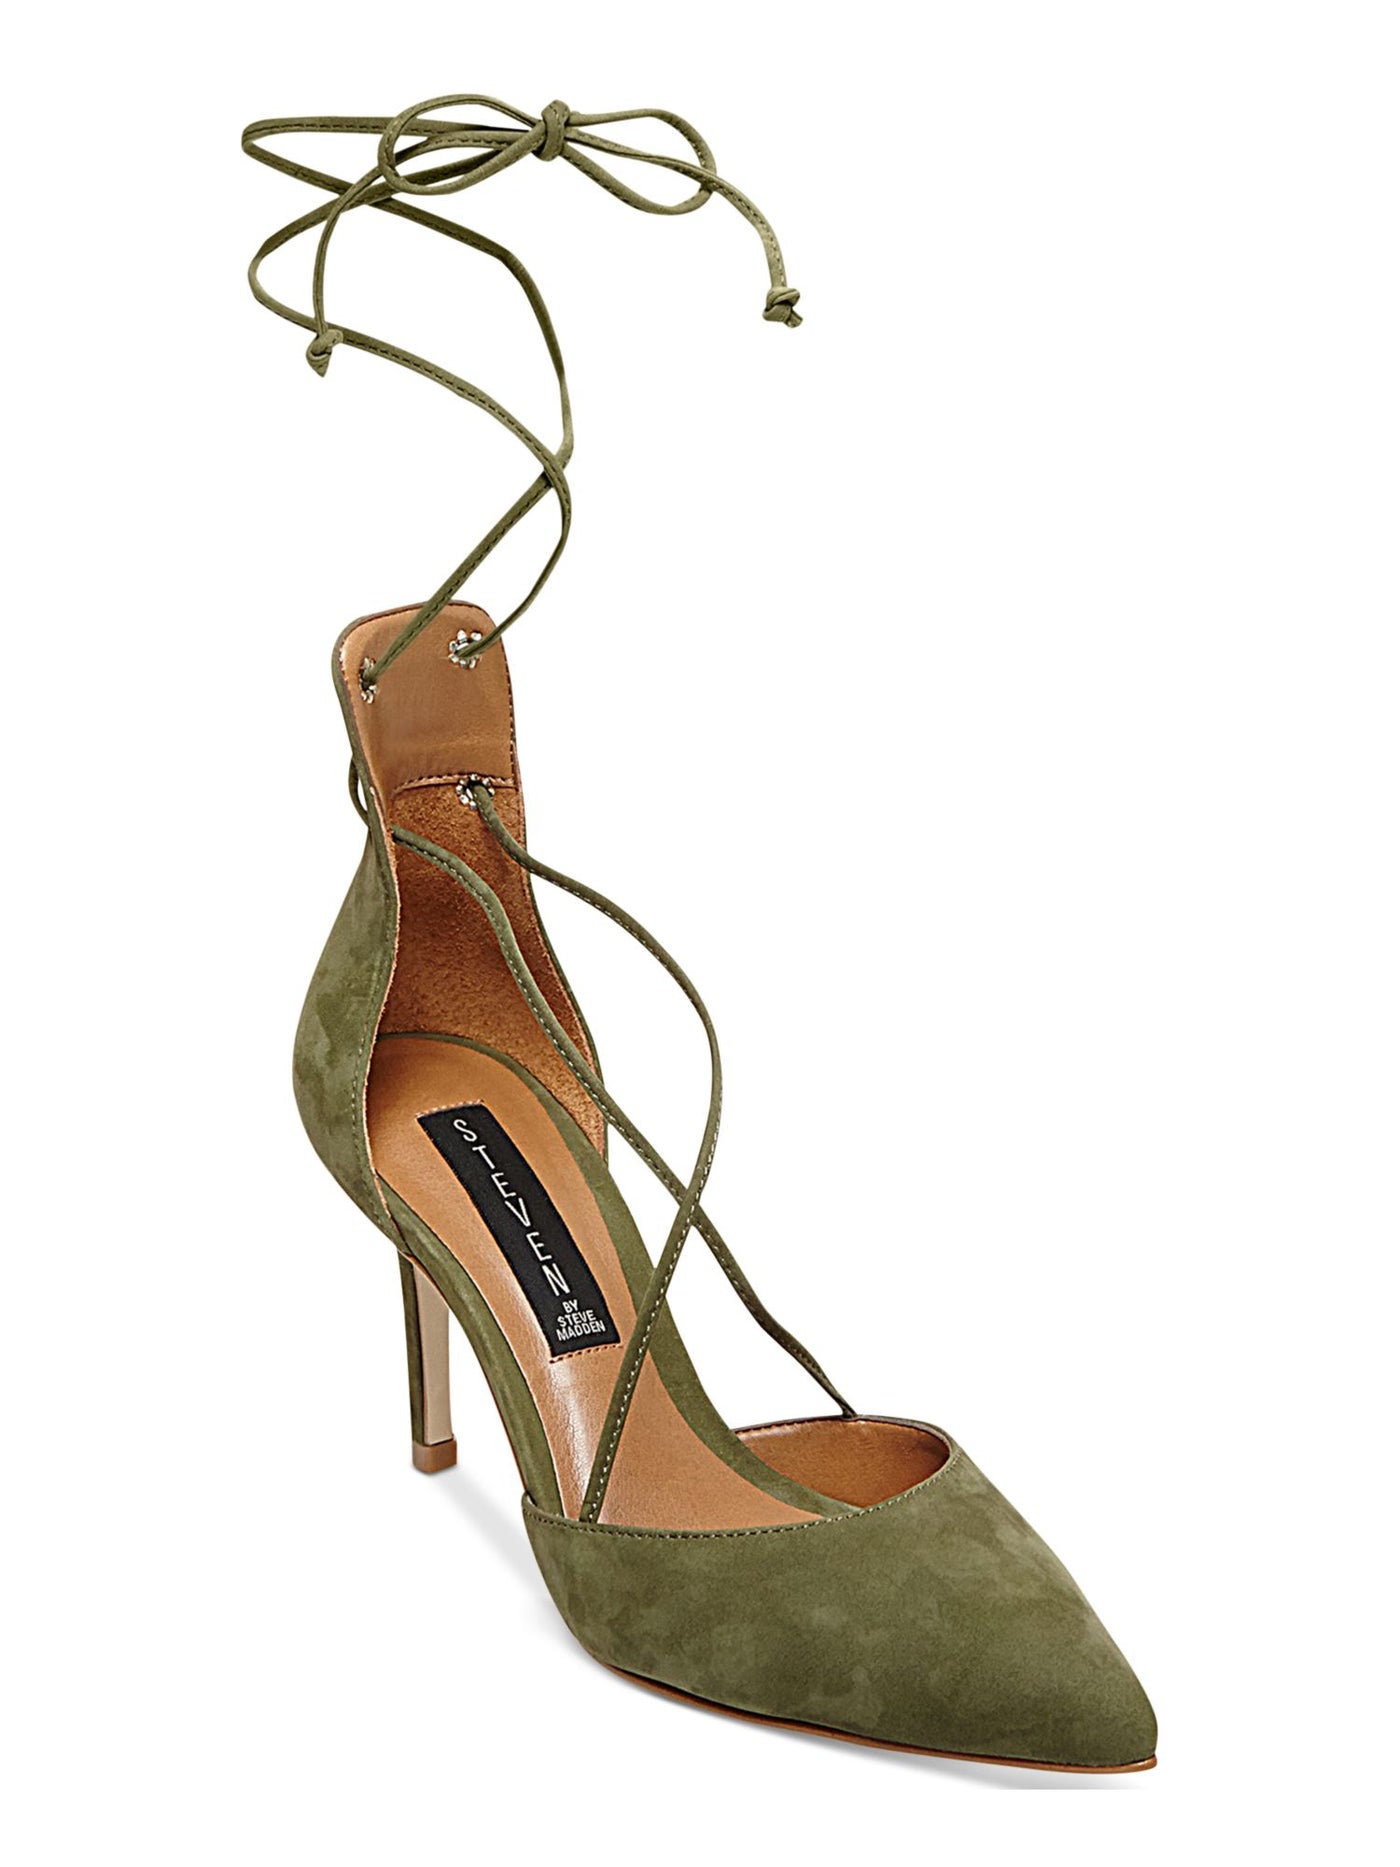 STEVEN Womens Green Spiceyy Pointed Toe Stiletto Lace-Up Leather Dress Pumps Shoes 8.5 B